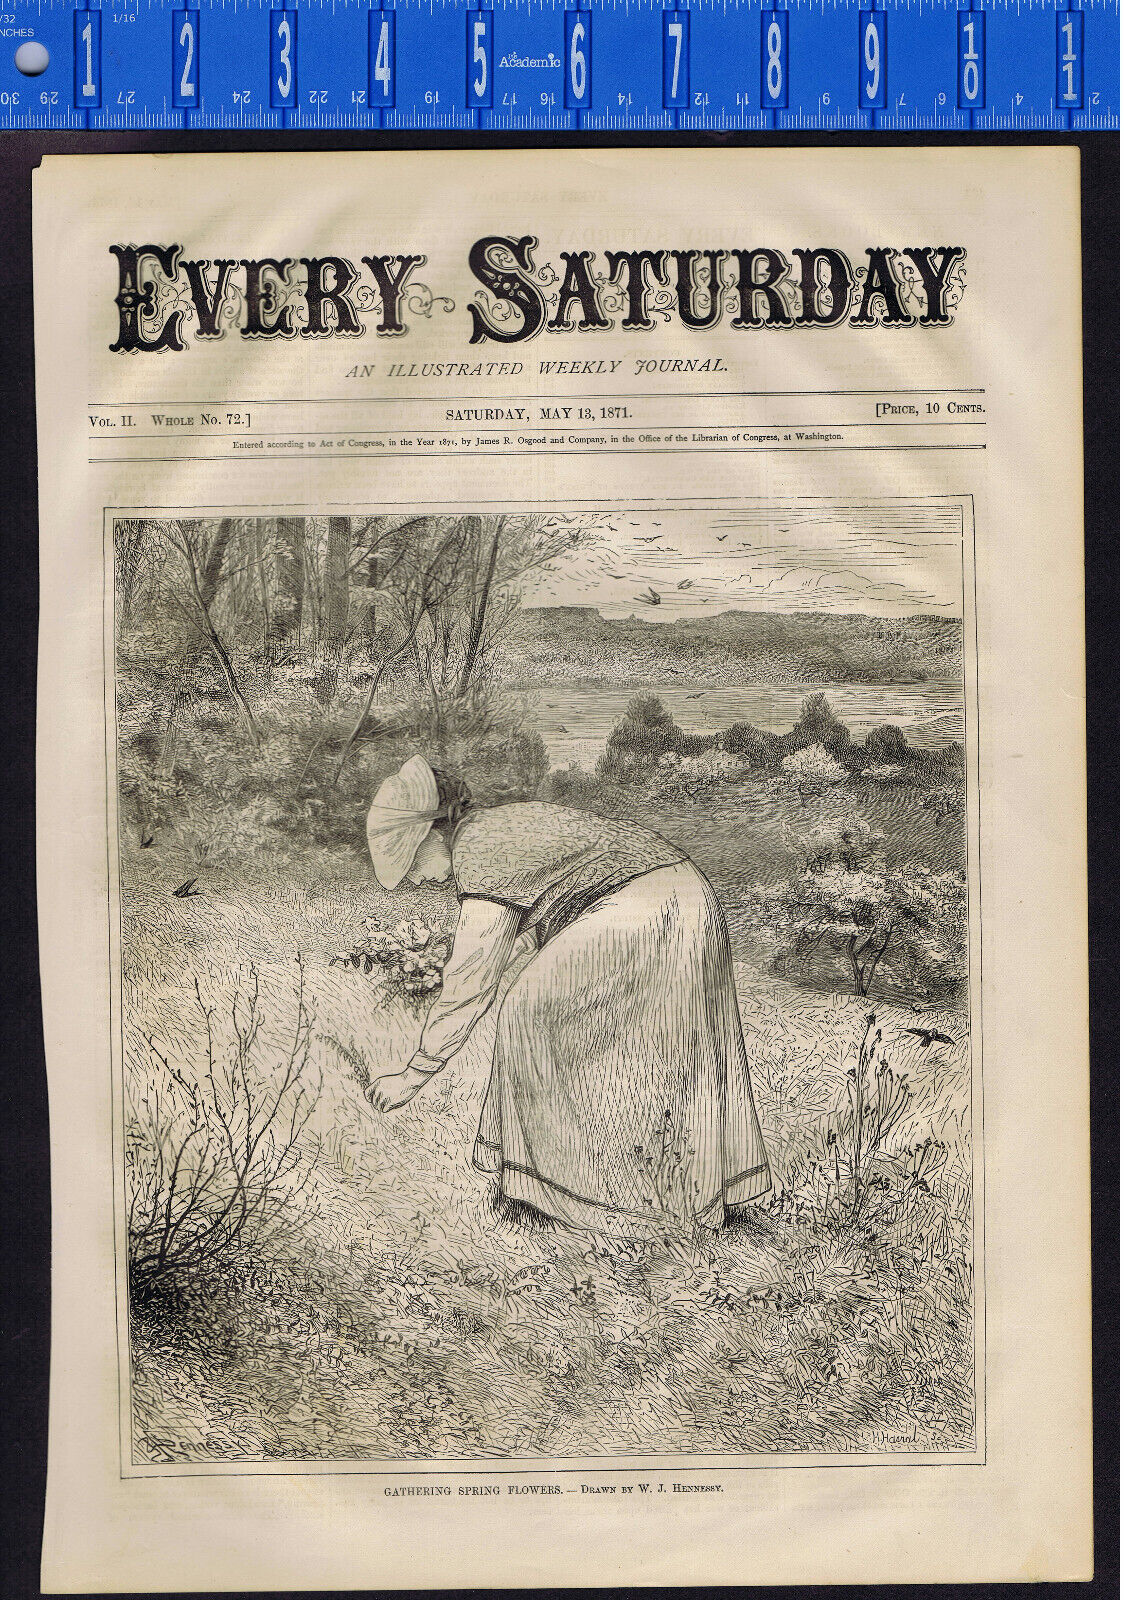 Gathering Spring Flowers,  New York Tammany - Every Saturday, May 1871